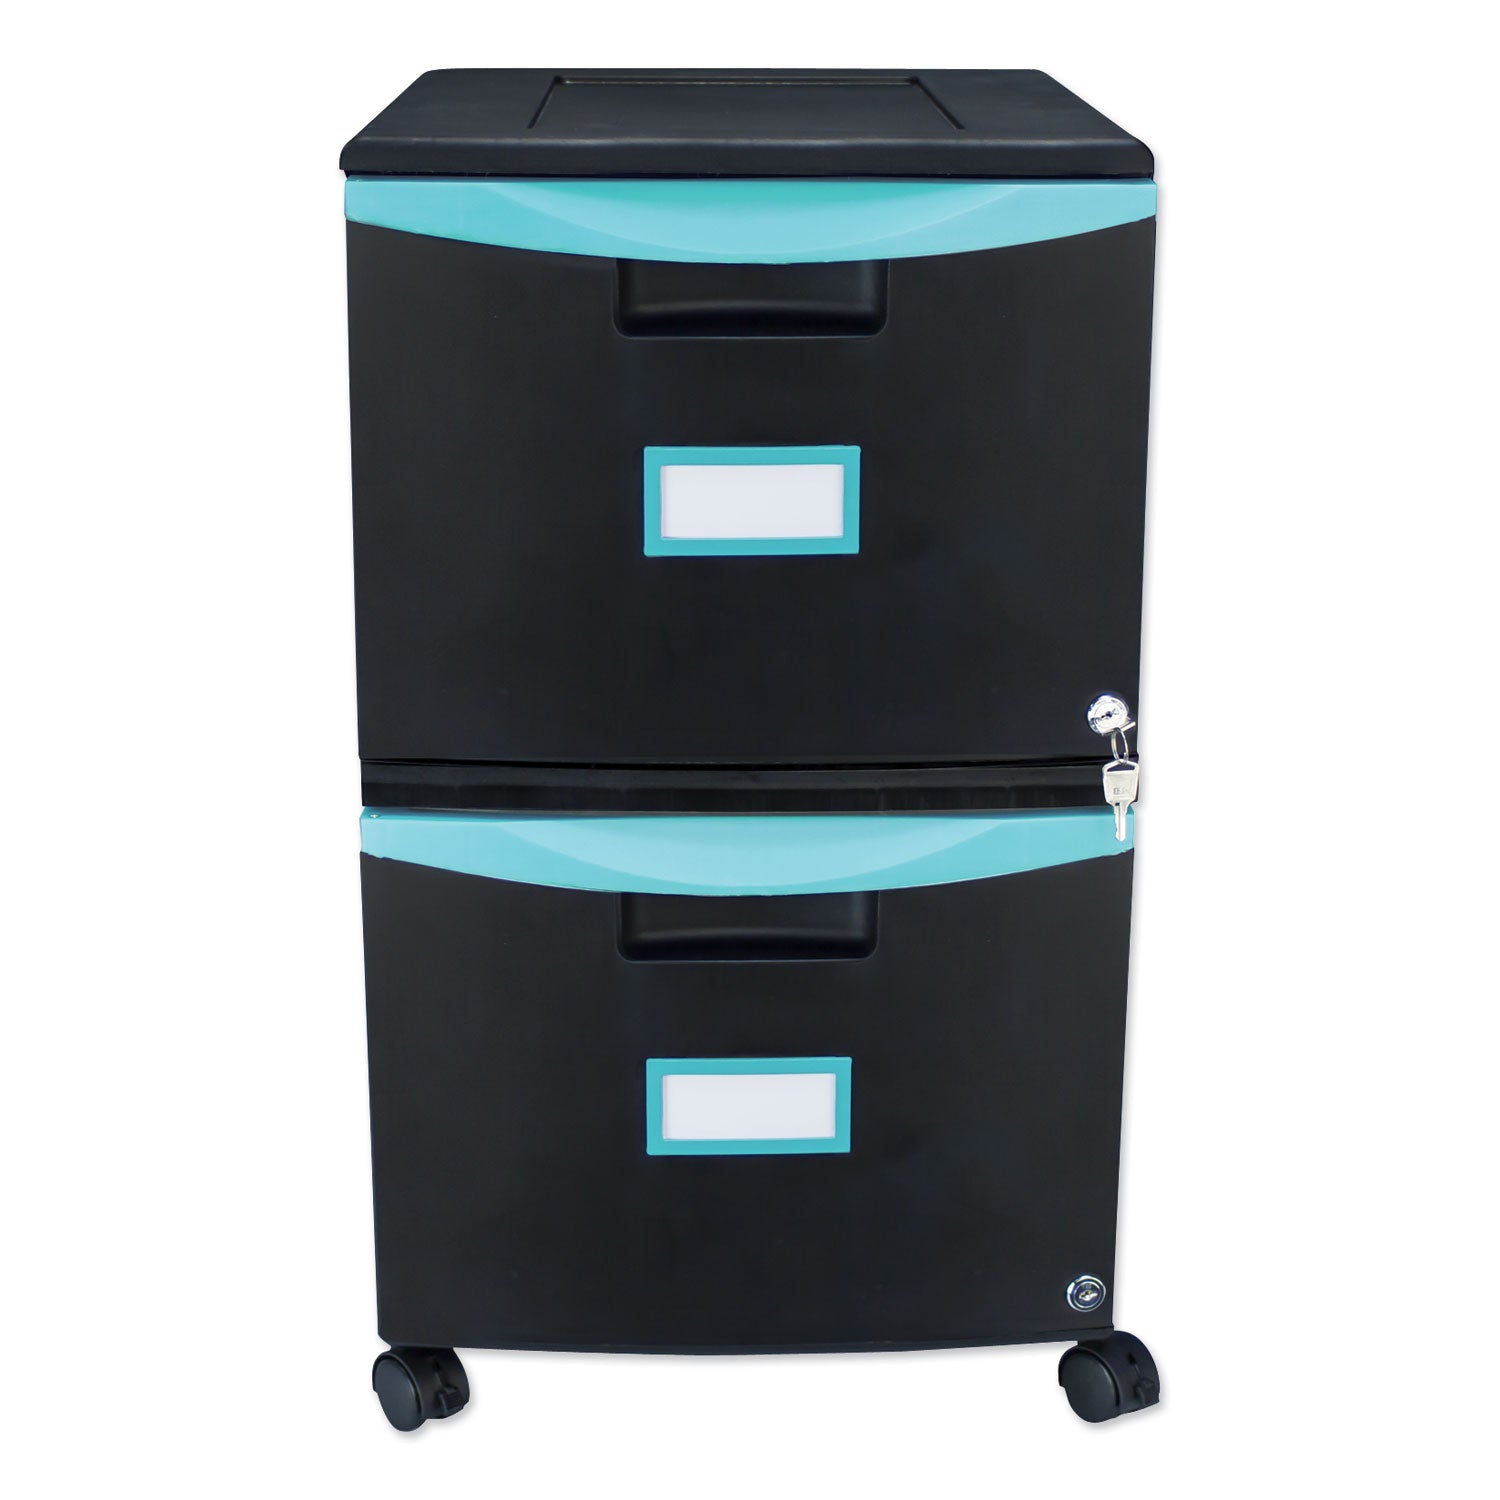 two-drawer-mobile-filing-cabinet-2-legal-letter-size-file-drawers-black-teal-1475-x-1825-x-26_stx61315u01c - 1